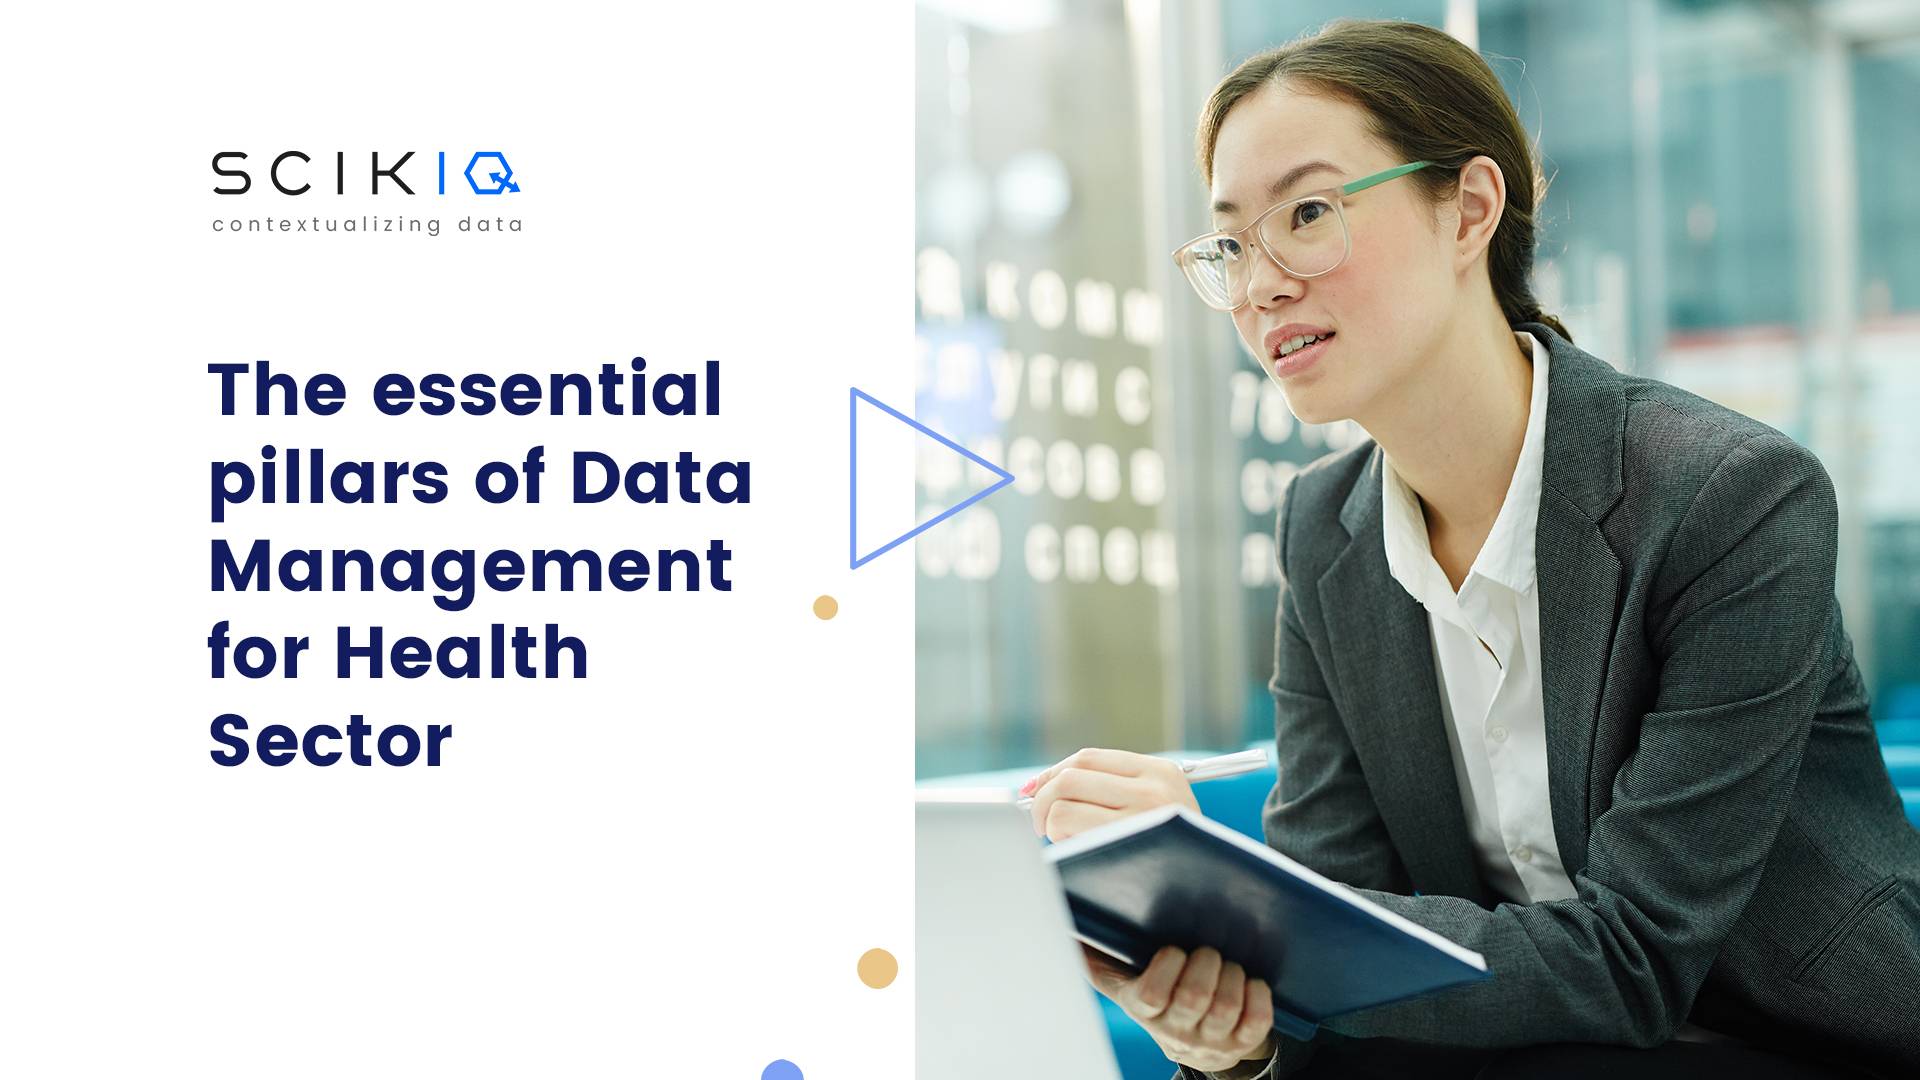 The essential pillars of Data Management for Health Sector. In an industry such as healthcare, effective data management is essential to improve operations and outcomes. Data Management for Healthcare